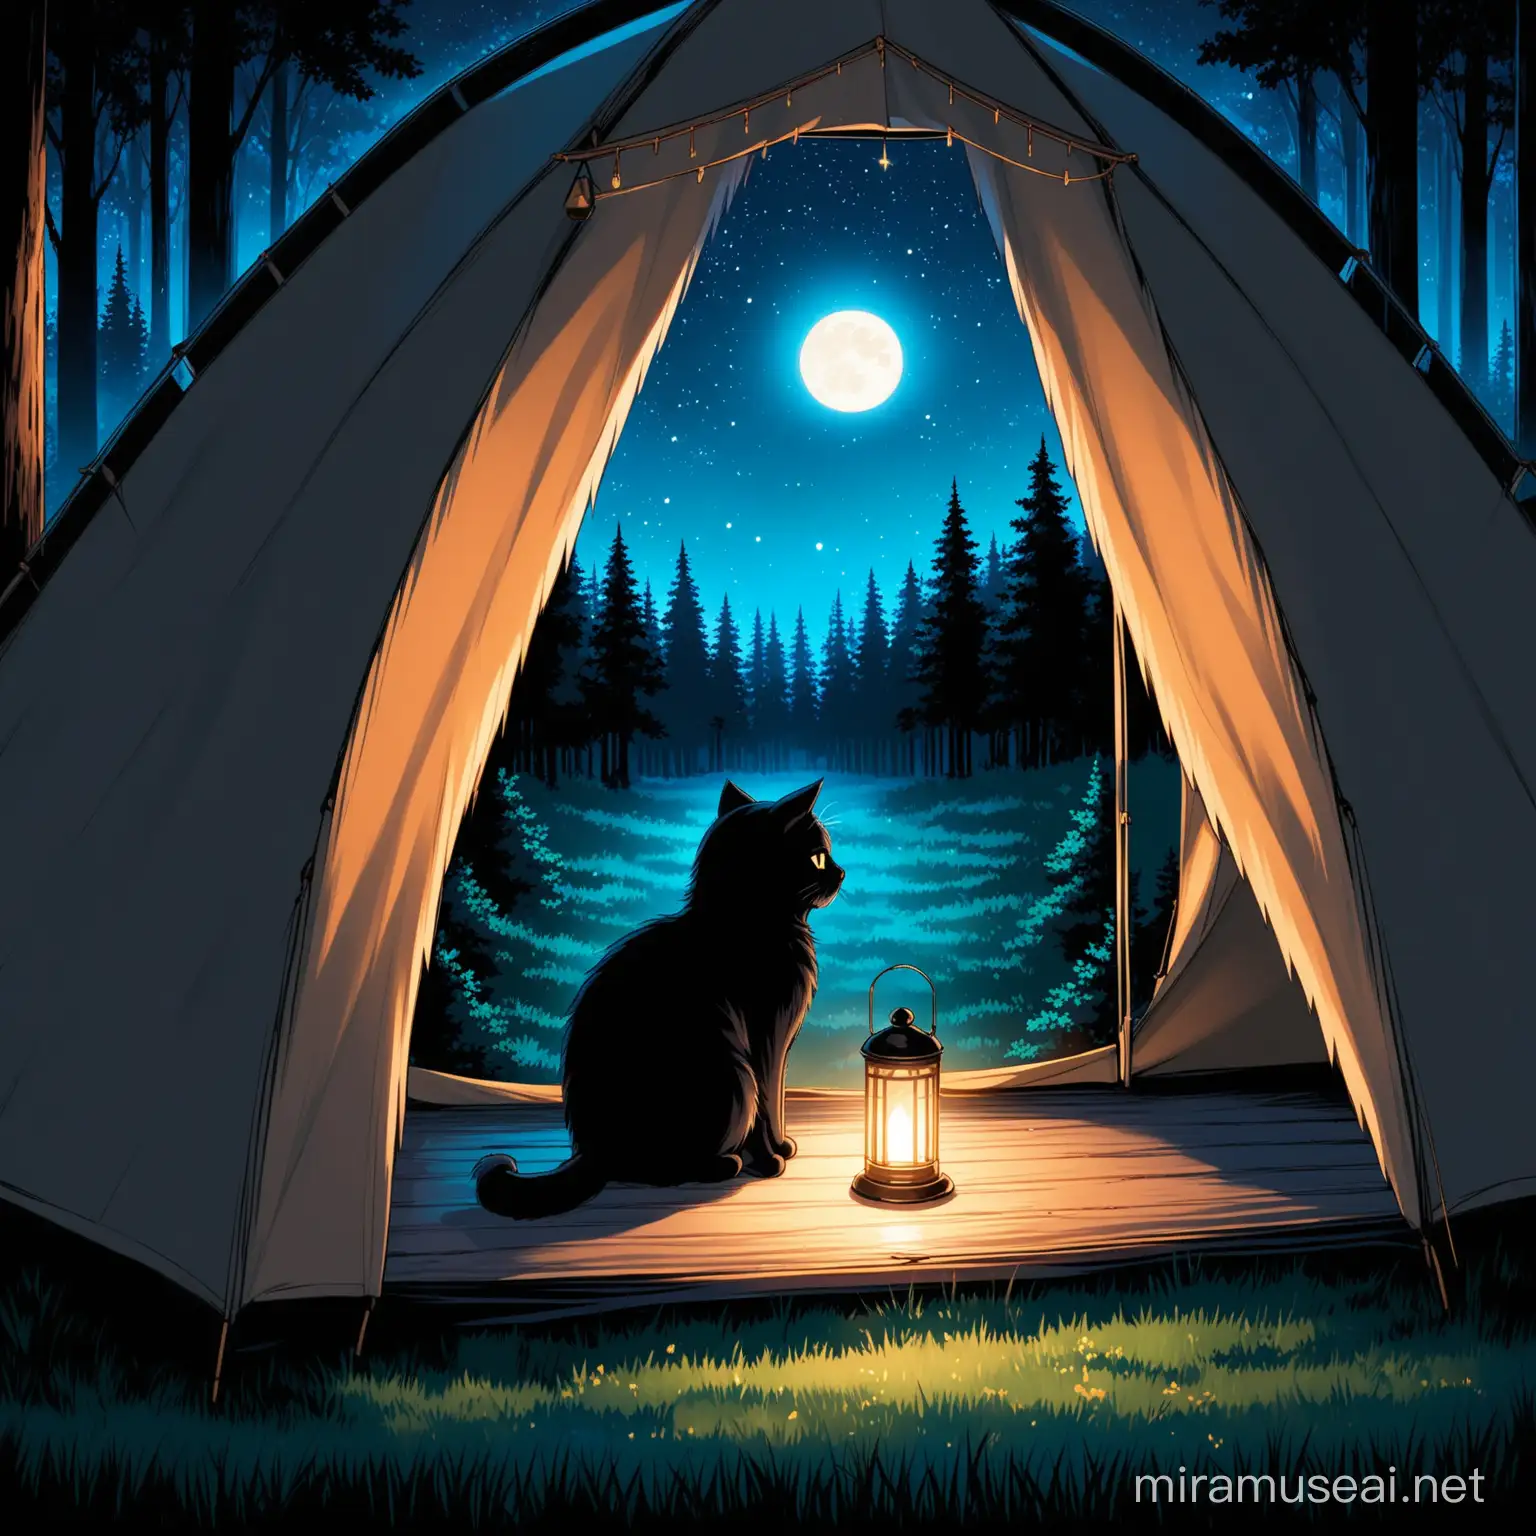 Nighttime Forest Scene with Black Fluffy Cat by Open Window